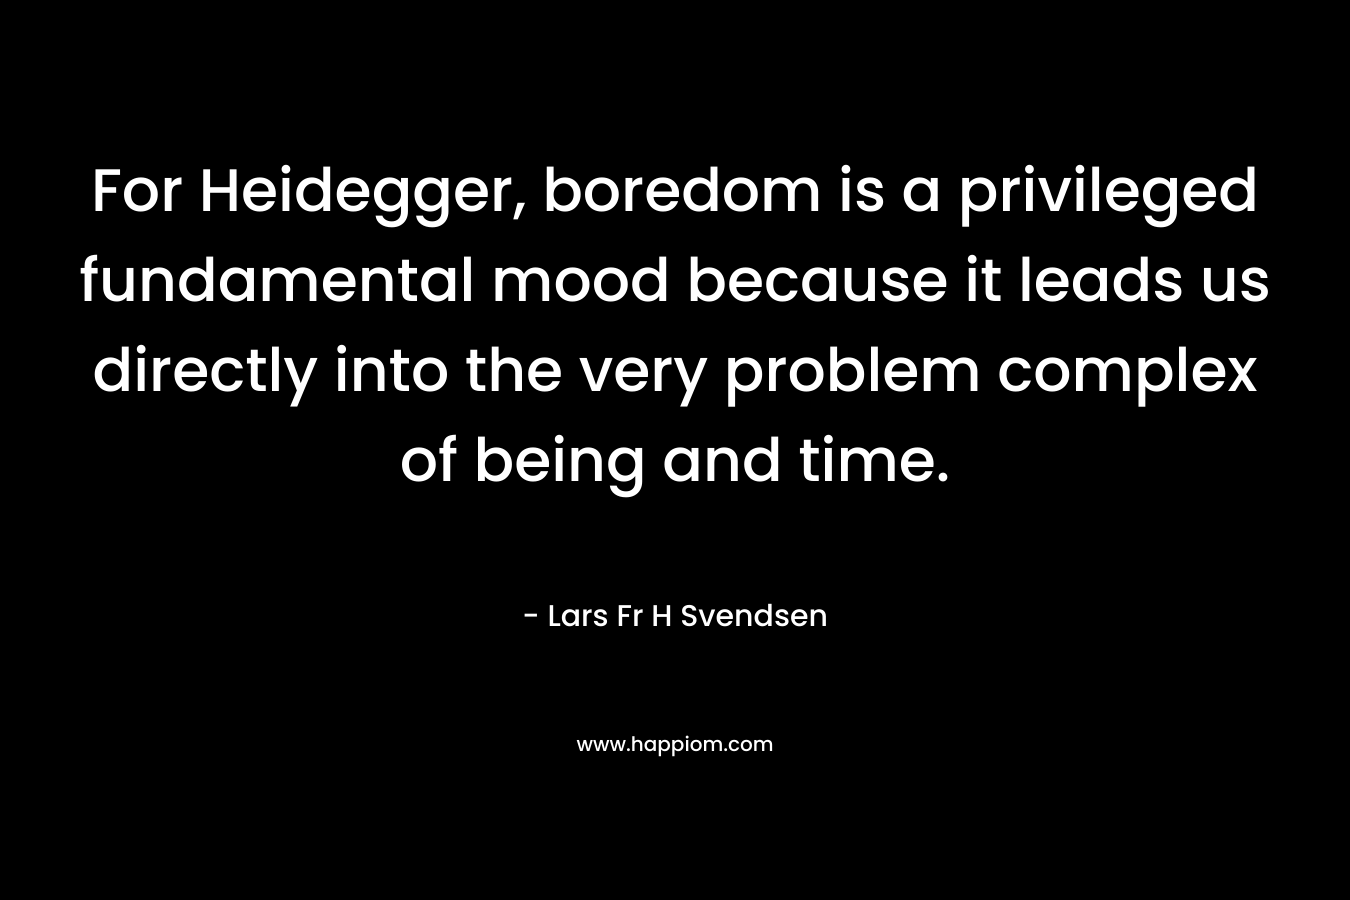 For Heidegger, boredom is a privileged fundamental mood because it leads us directly into the very problem complex of being and time.